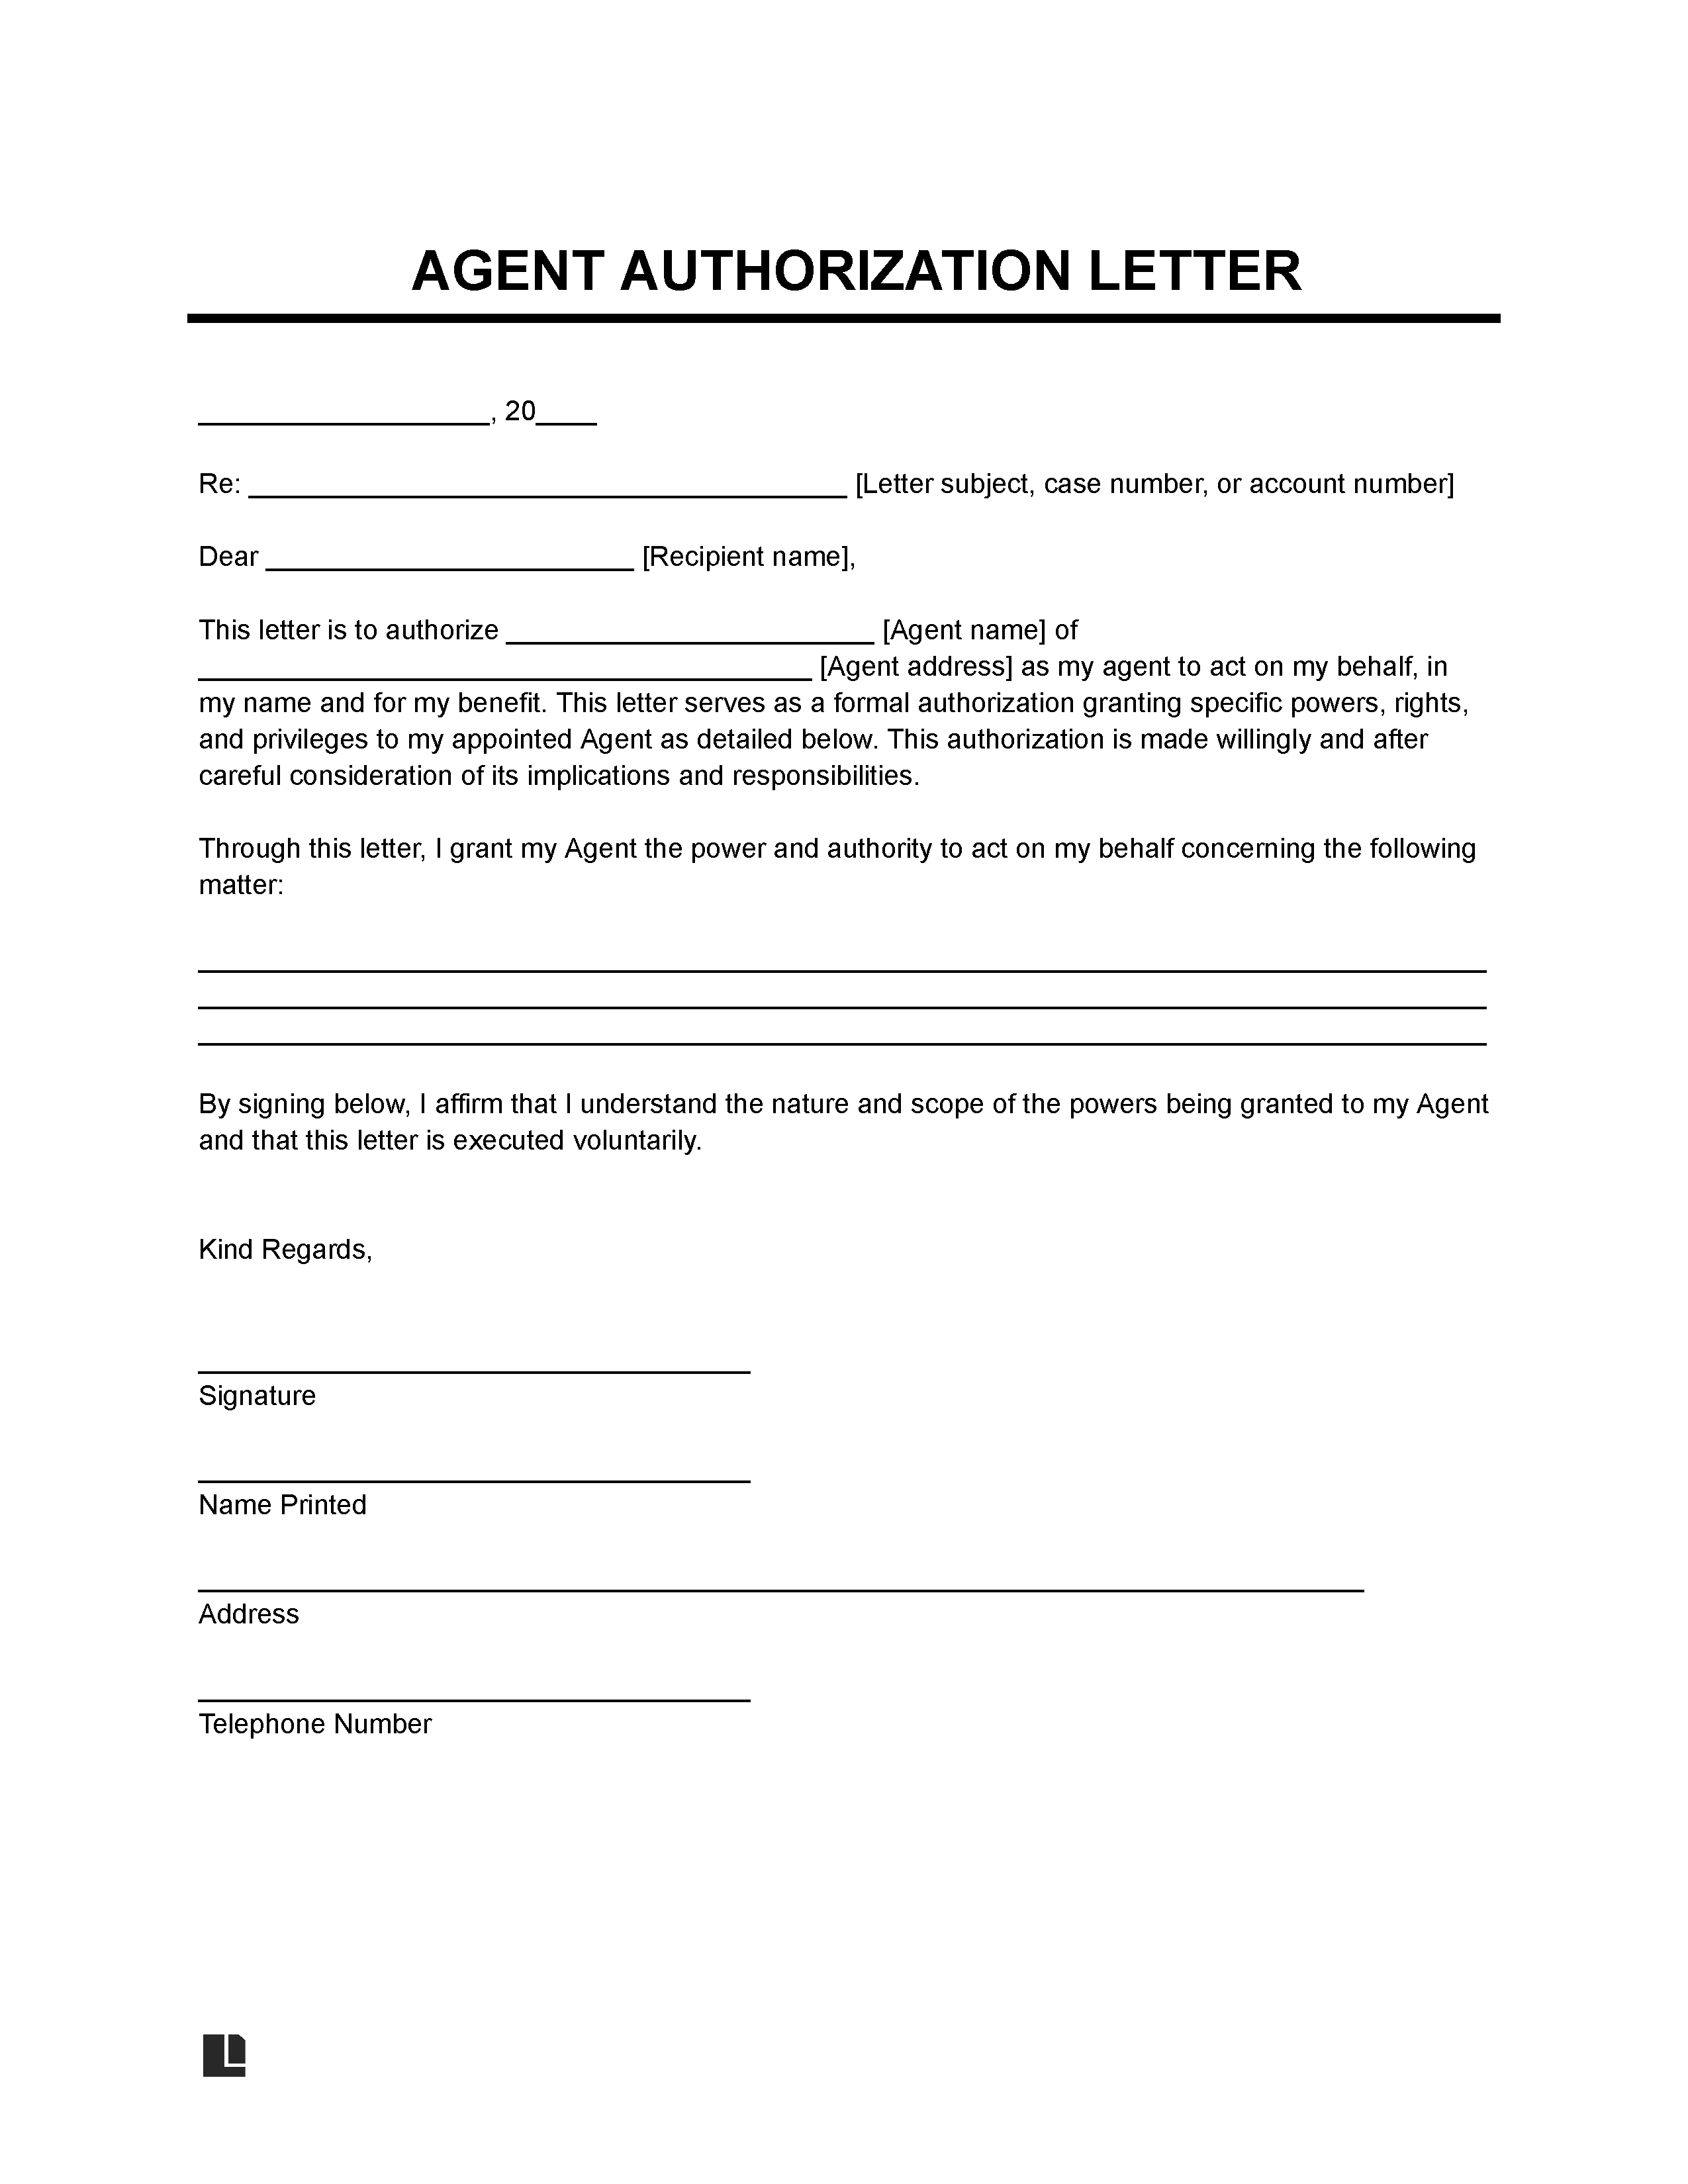 Agent Authorization Letter Template